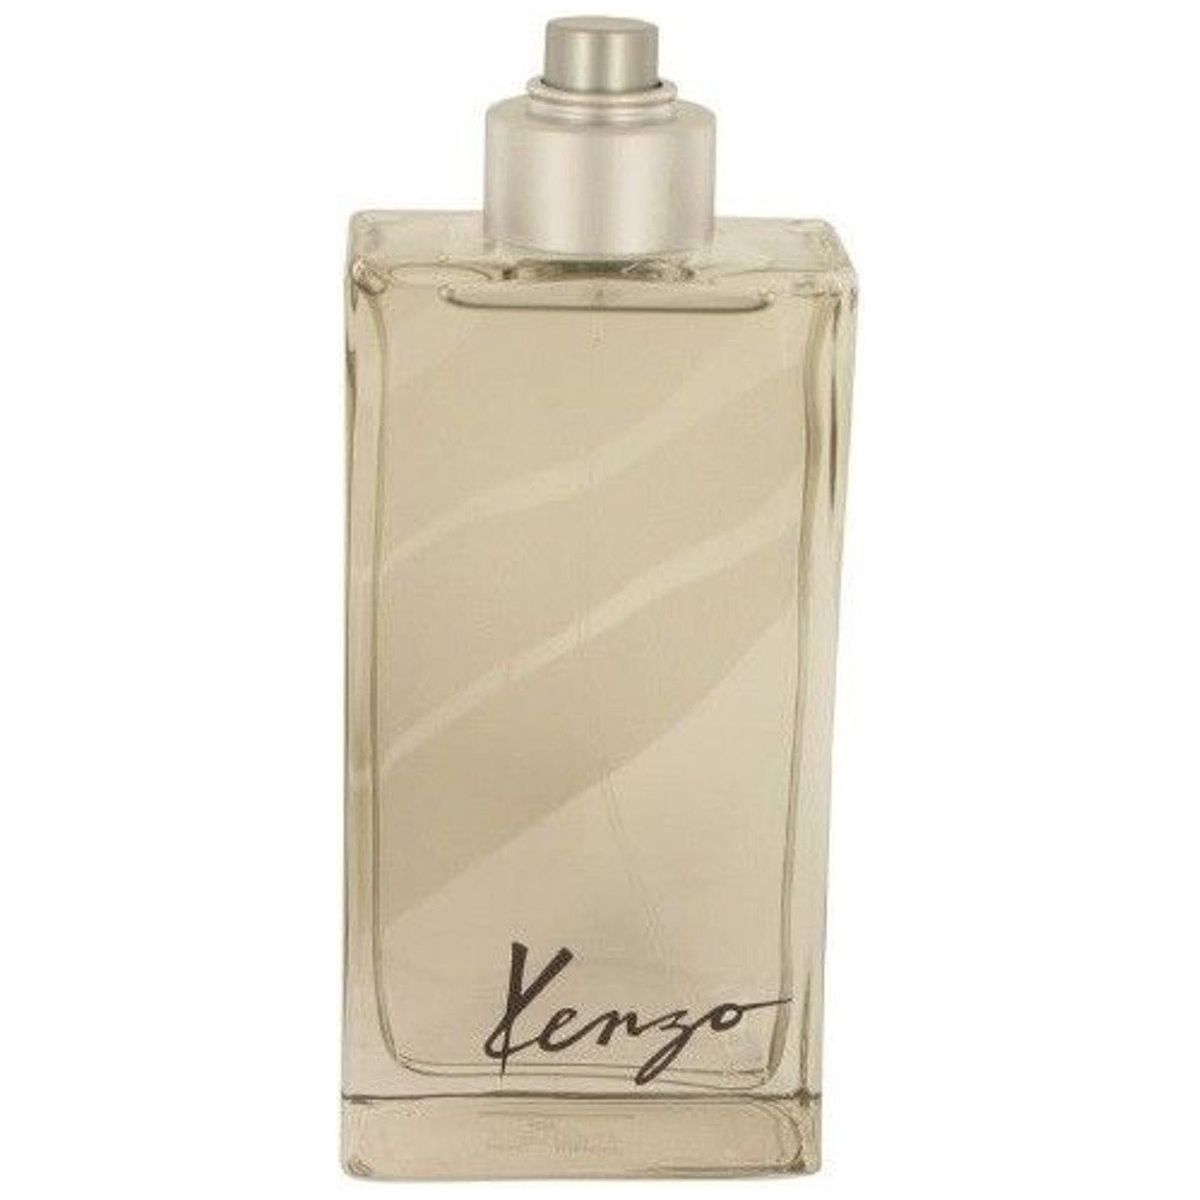 for men New / JUNGLE Tester 3.3 cologne by oz 3.4 Kenzo EDT